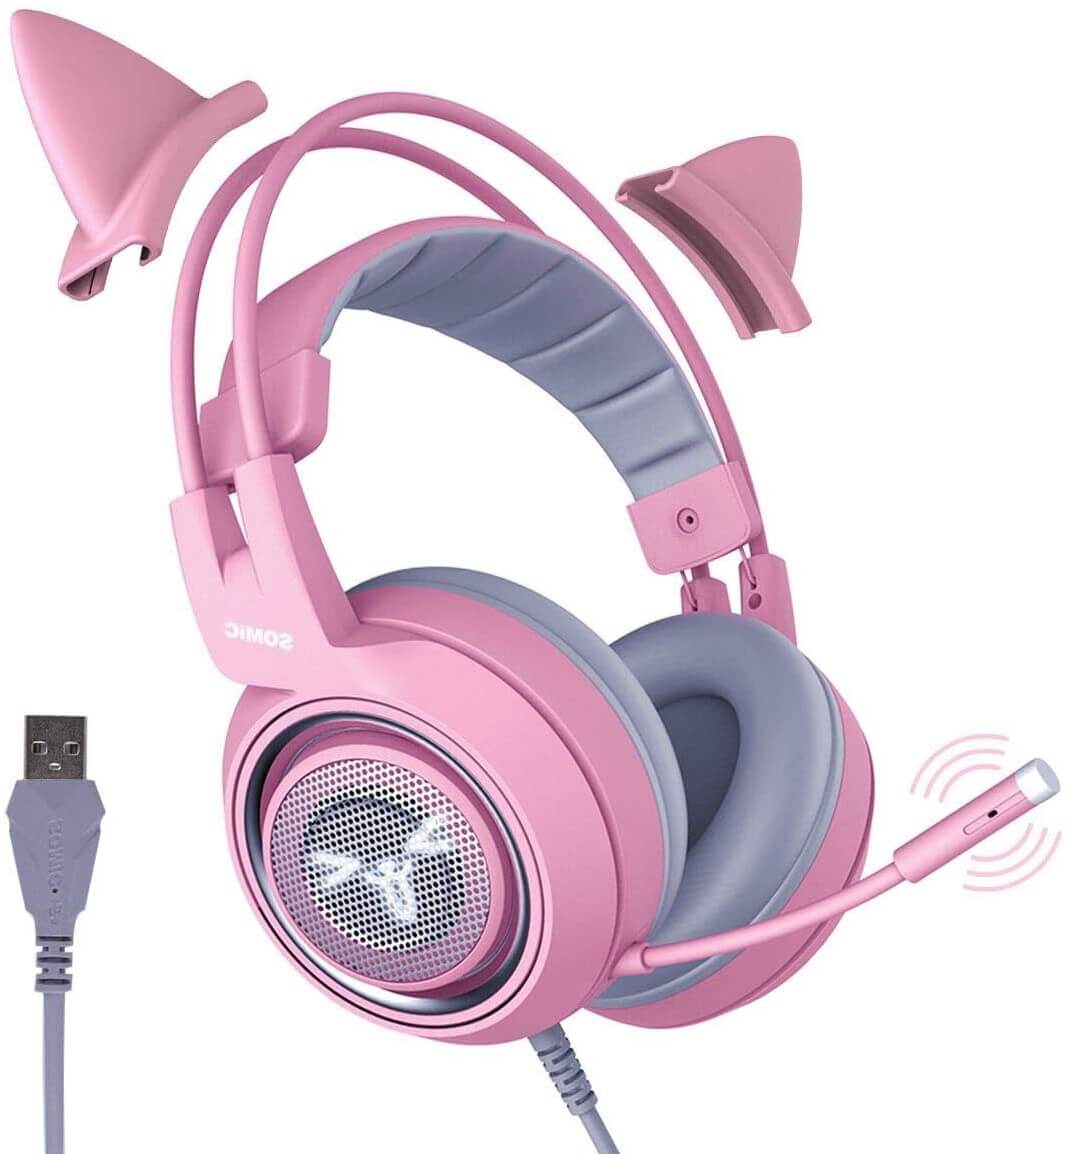 10 Best Cat Ear Headphones For Kids And Adults in 2021